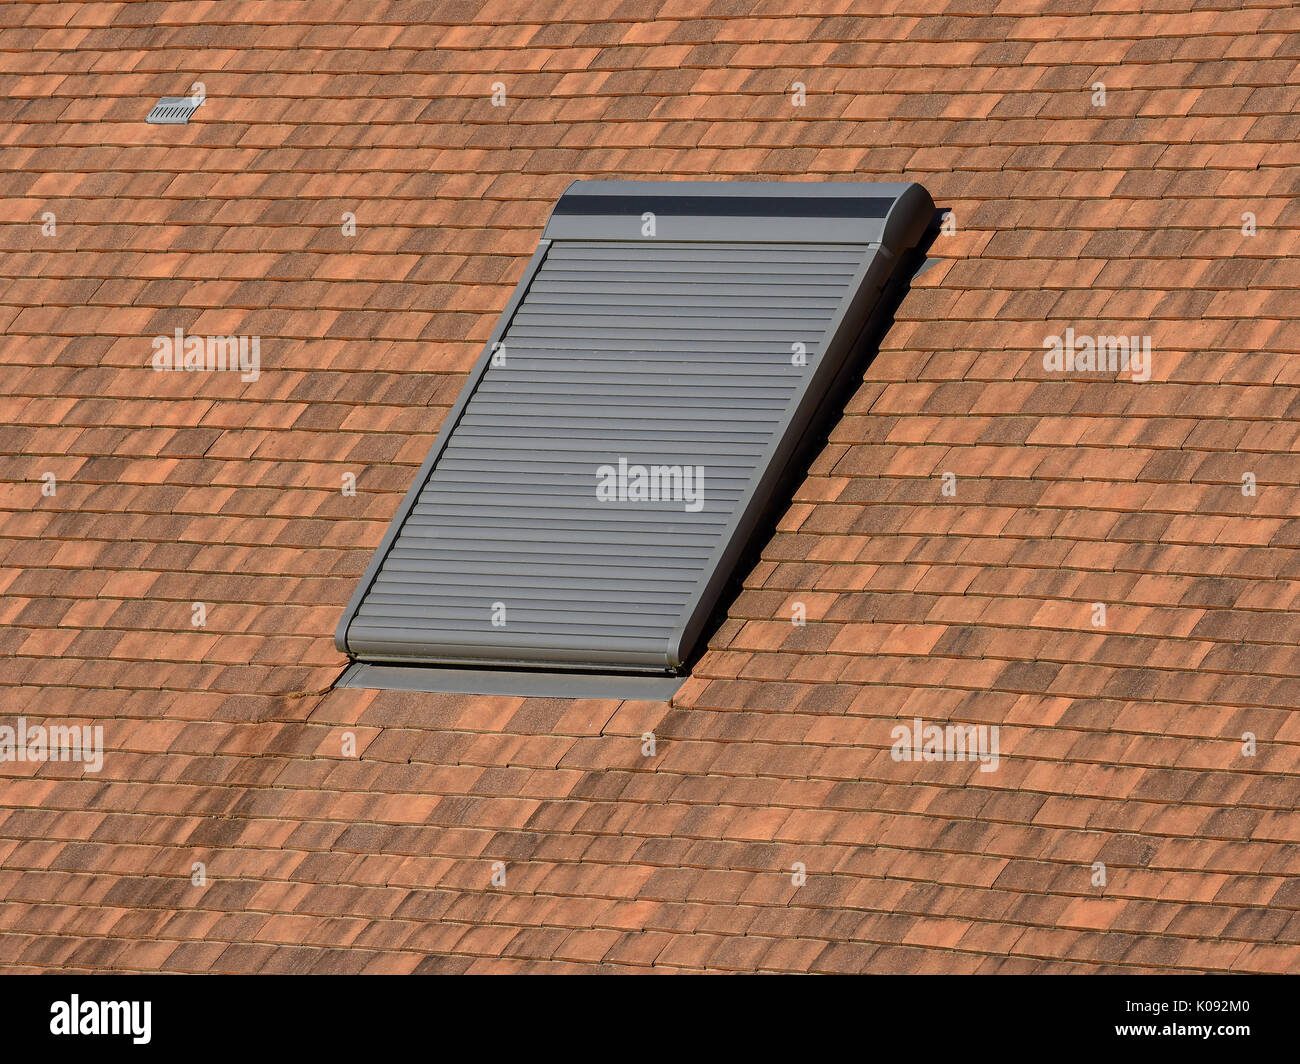 Velux roof-light window with blind closed. Stock Photo